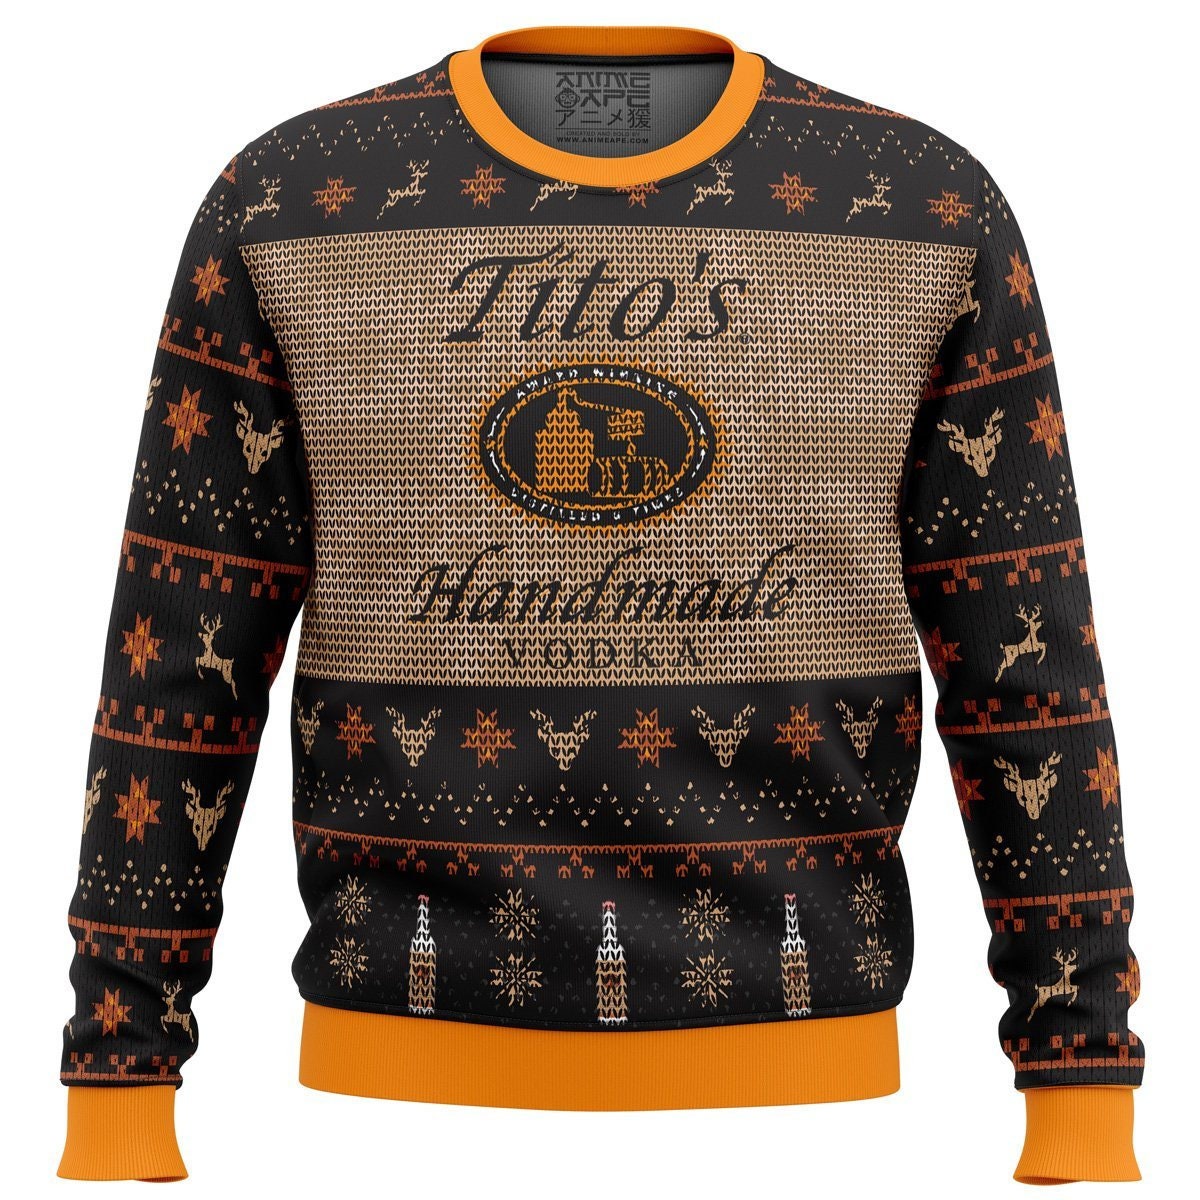 Titos Vodka Ugly Christmas Sweater